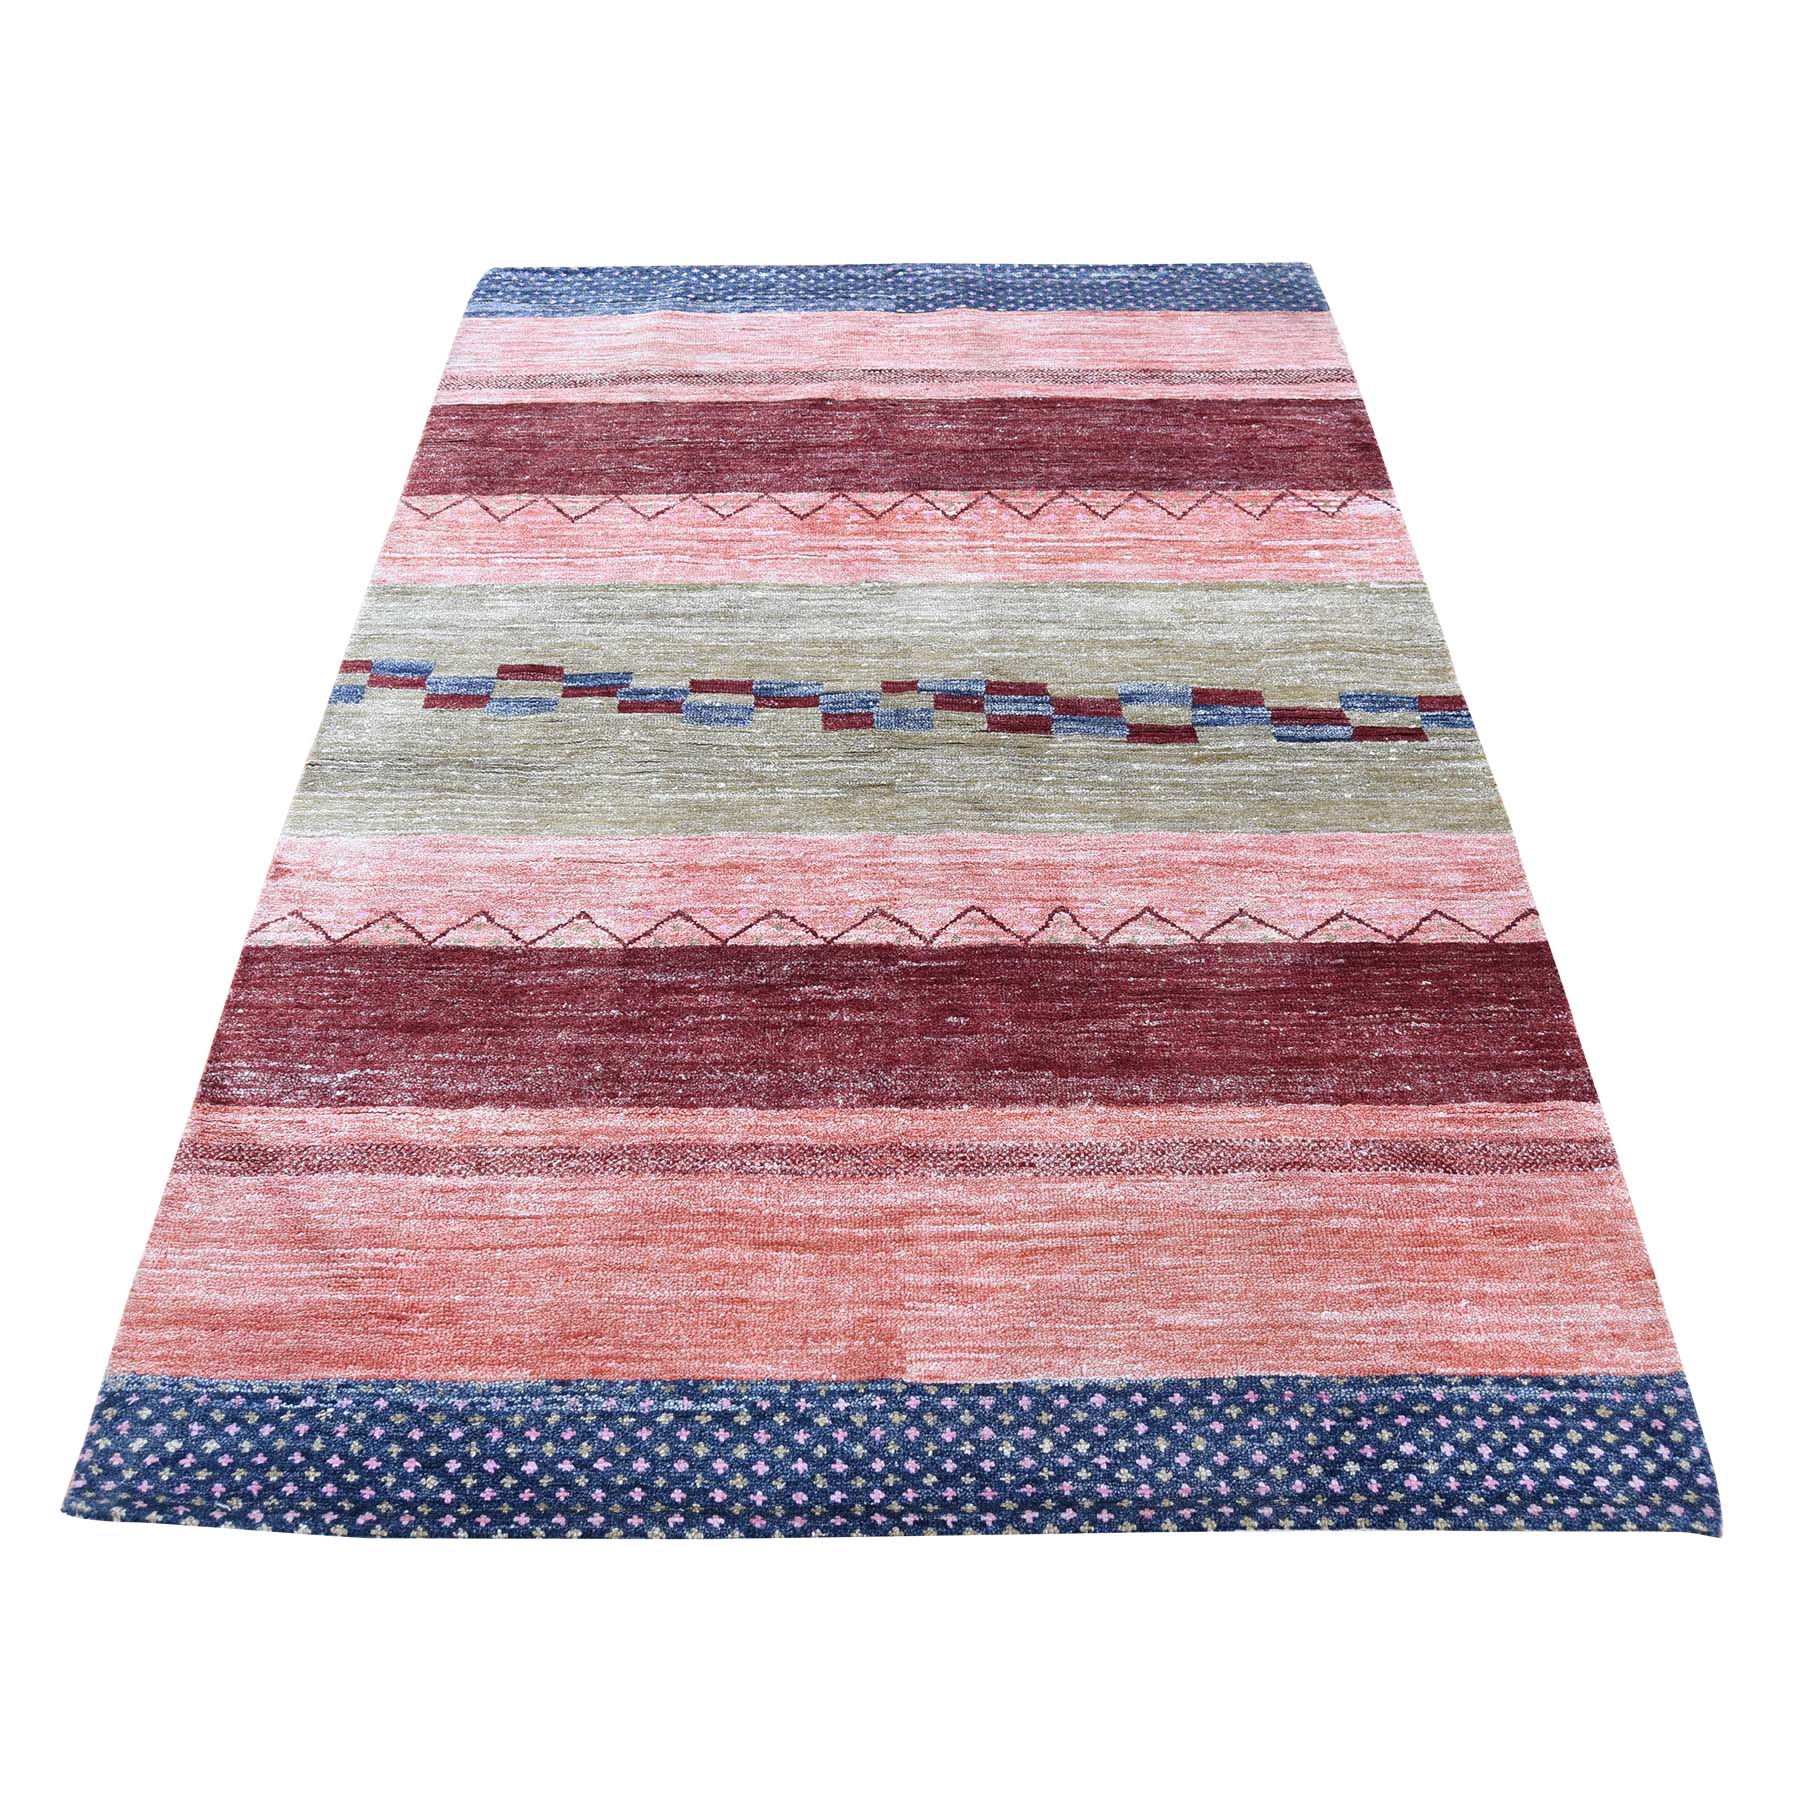 3'9"x5'9" Hand-Loomed Gabbeh Design Colorful Pure Wool Oriental Rug 